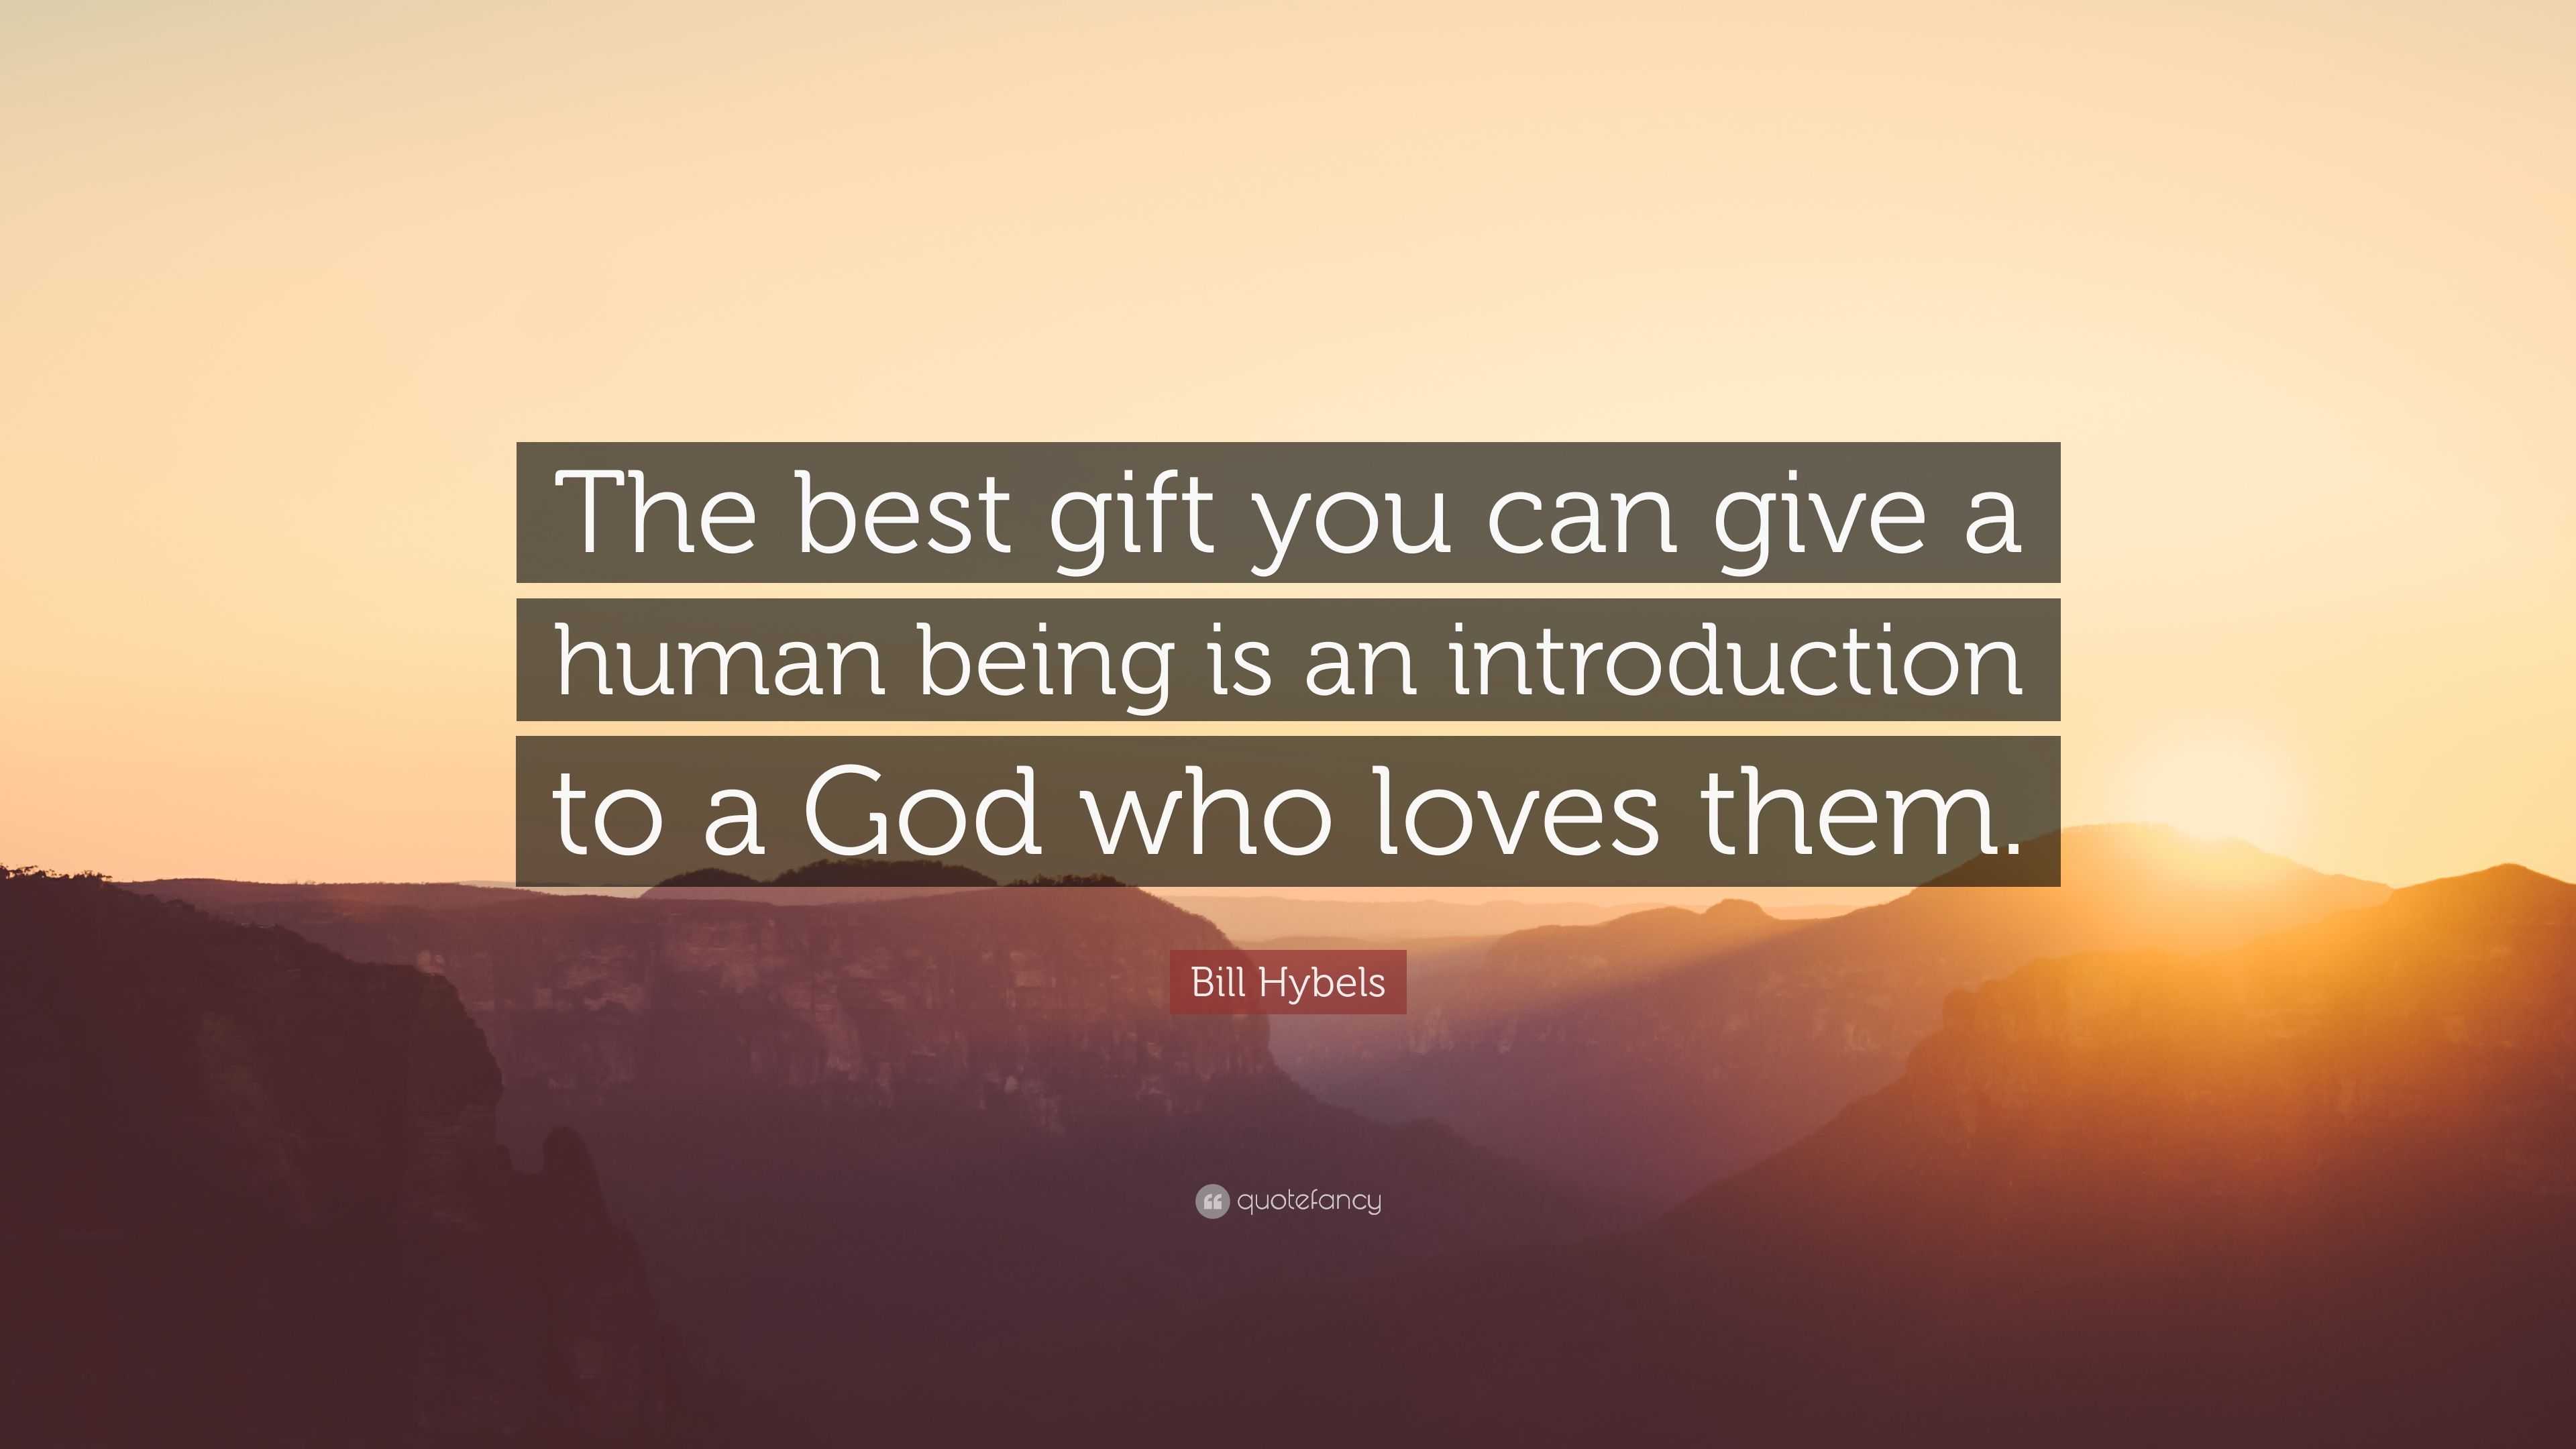 Bill Hybels Quote “the Best T You Can Give A Human Being Is An